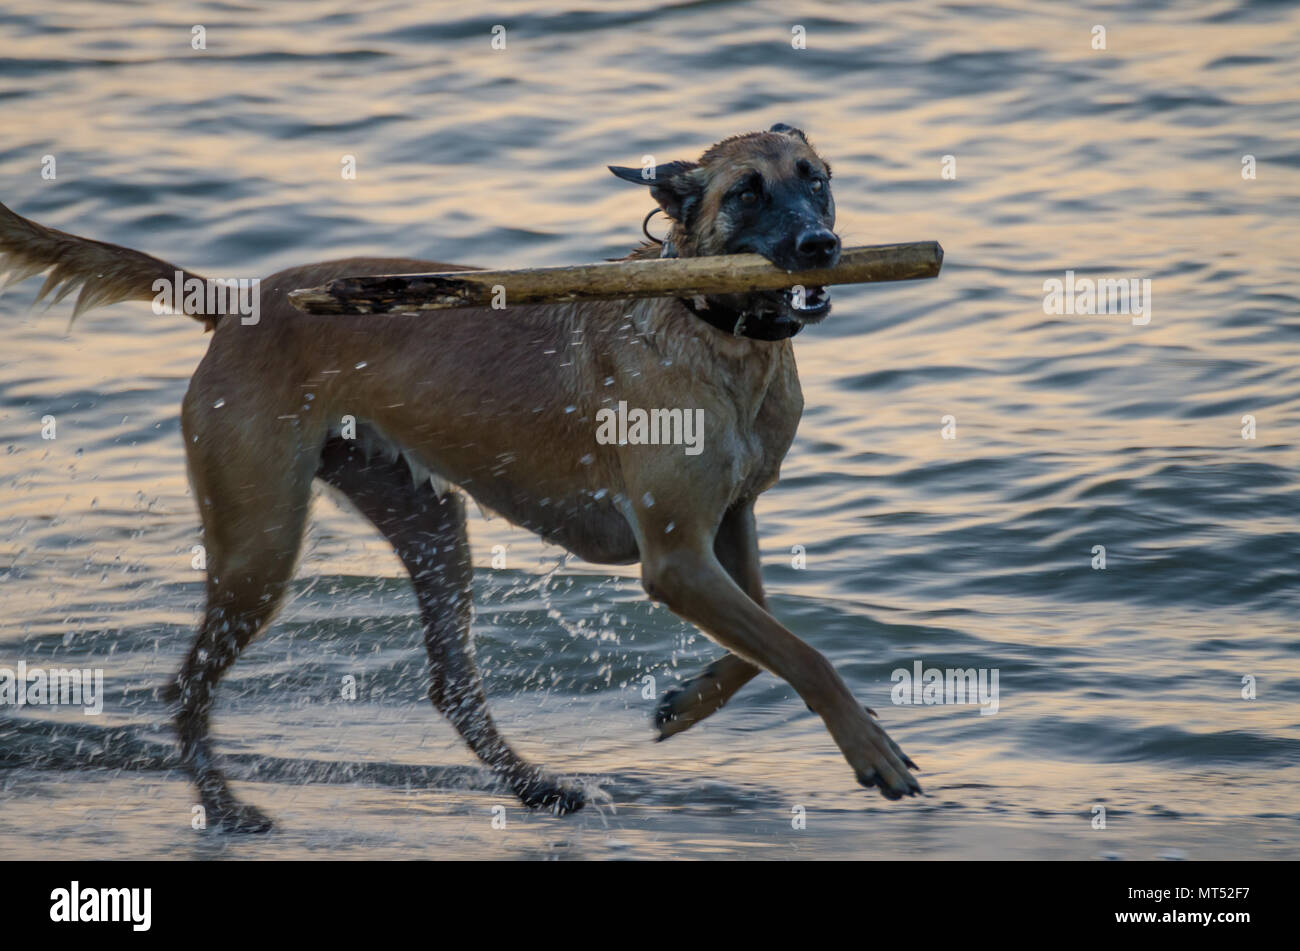 Wet dog running at sea on beach with stick in its mouth during evening Stock Photo